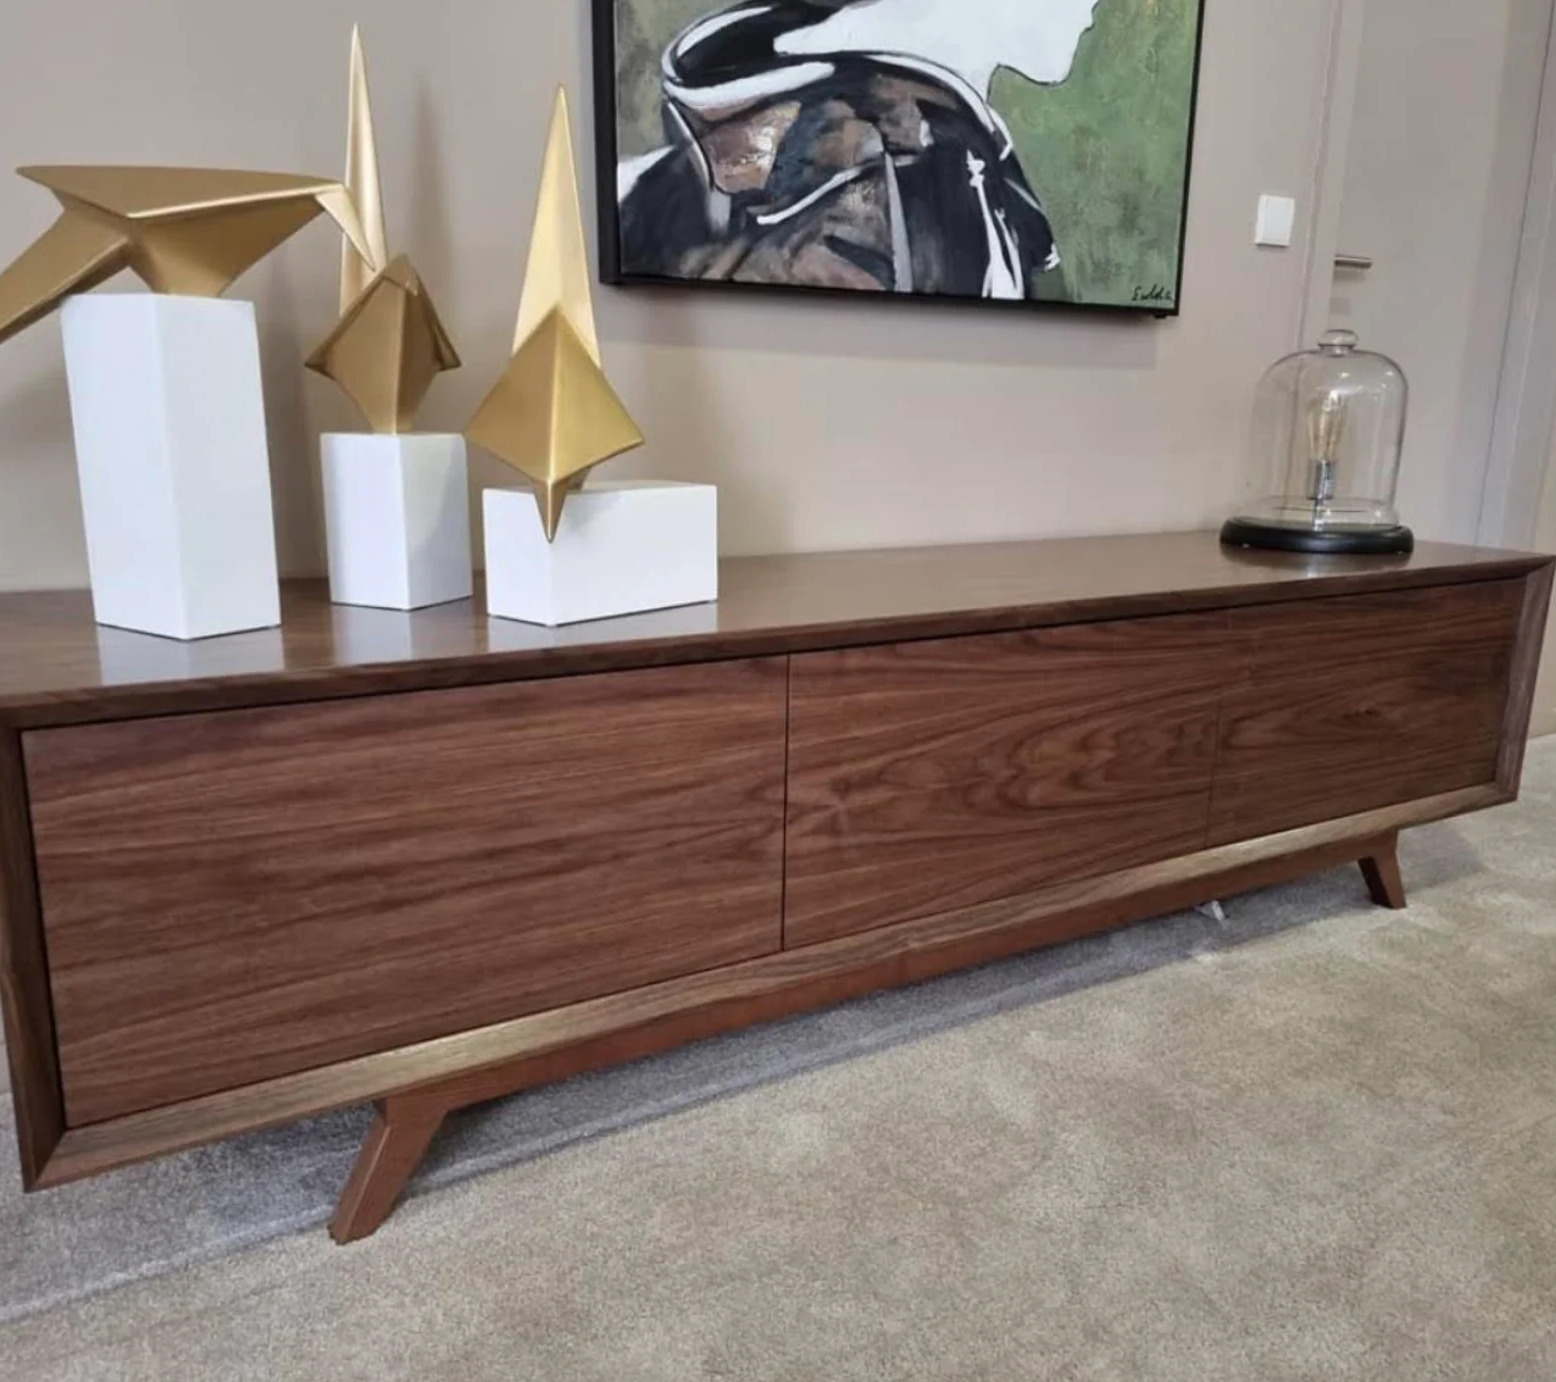 Walnut Sideboard – SOLD OUT!